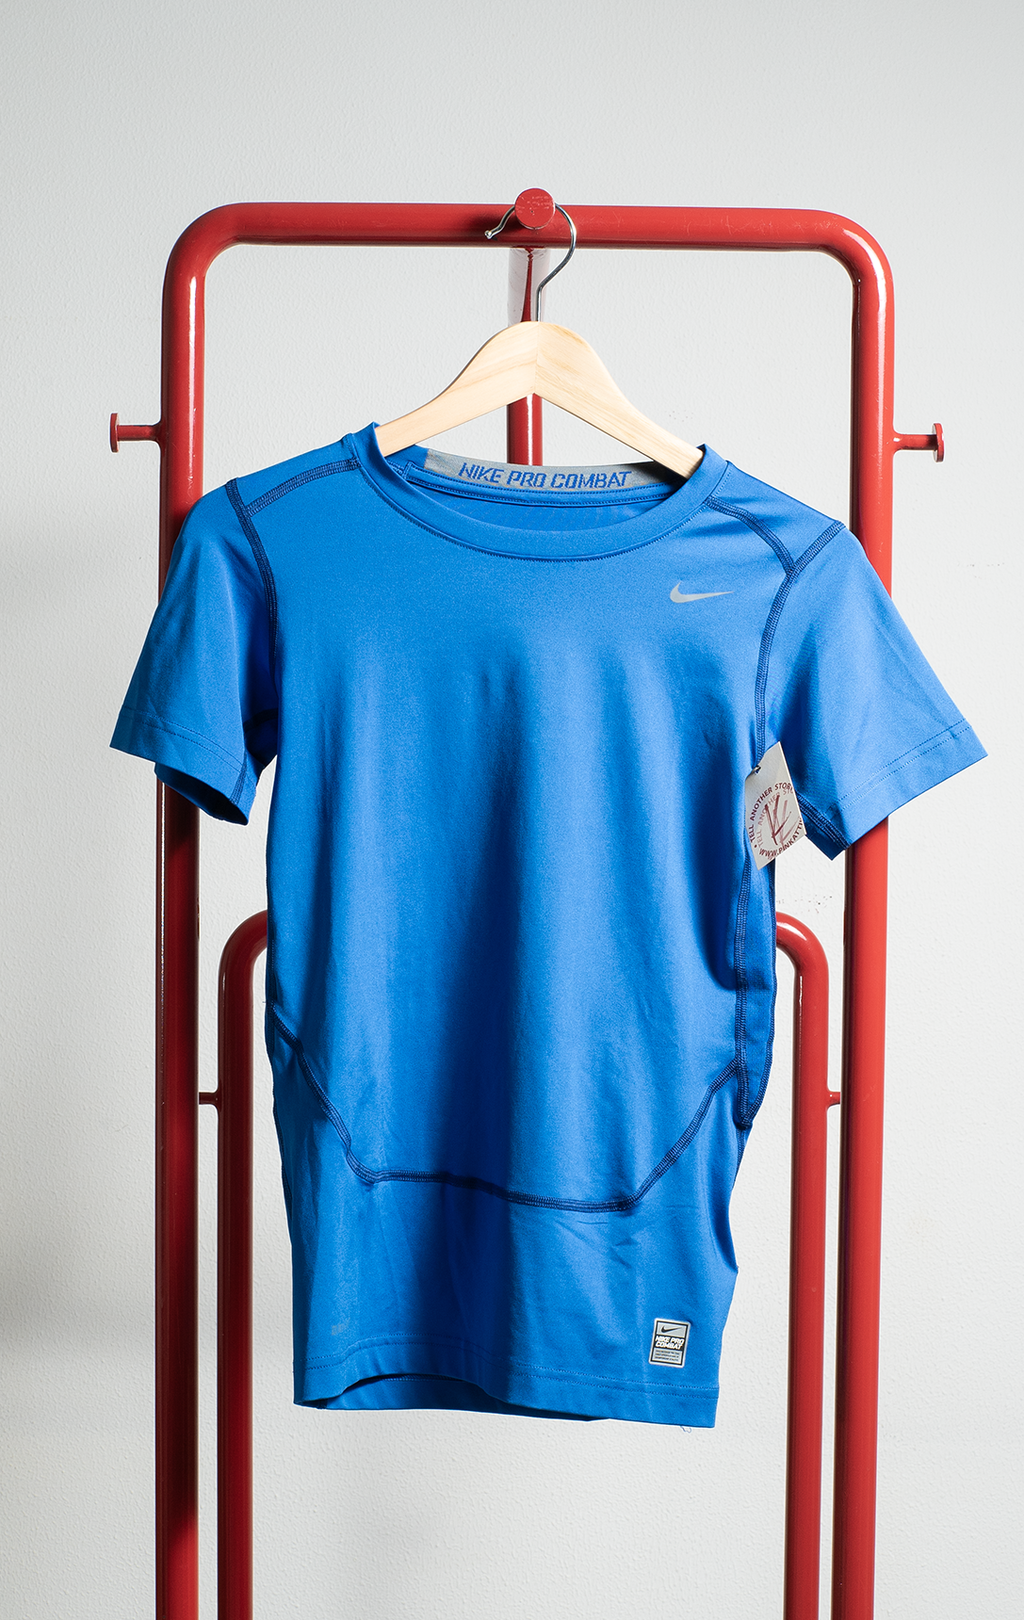 NIKE DRY-FIT TOP - Blue - XLarge